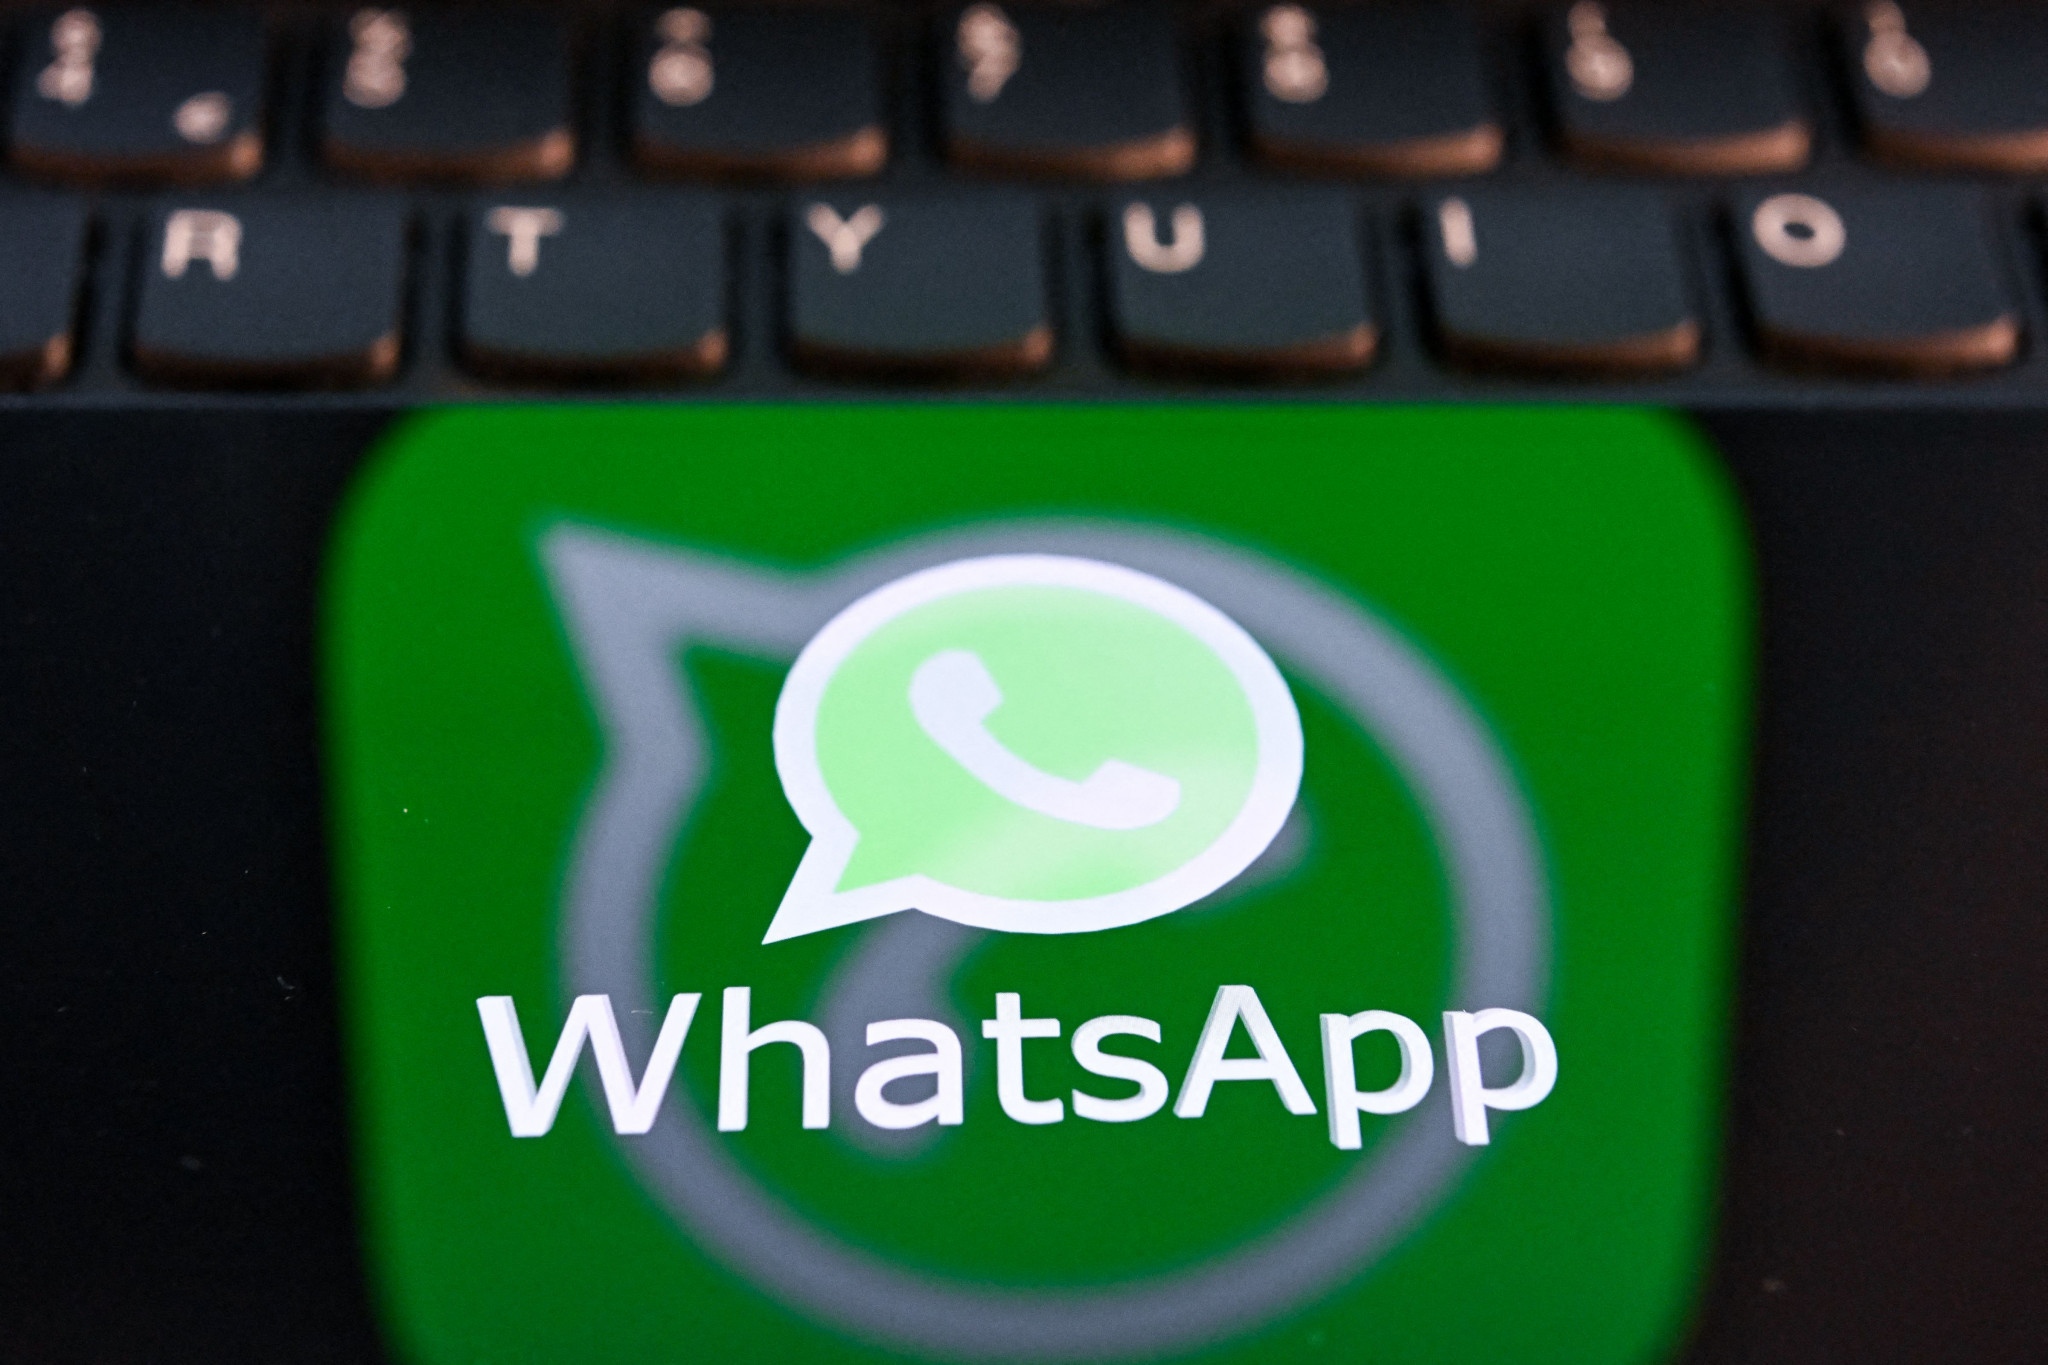 A WhatsApp number - +55 31 98947-7889 - is the latest addition to tool first introduced by the COB in 2018 ©Getty Images